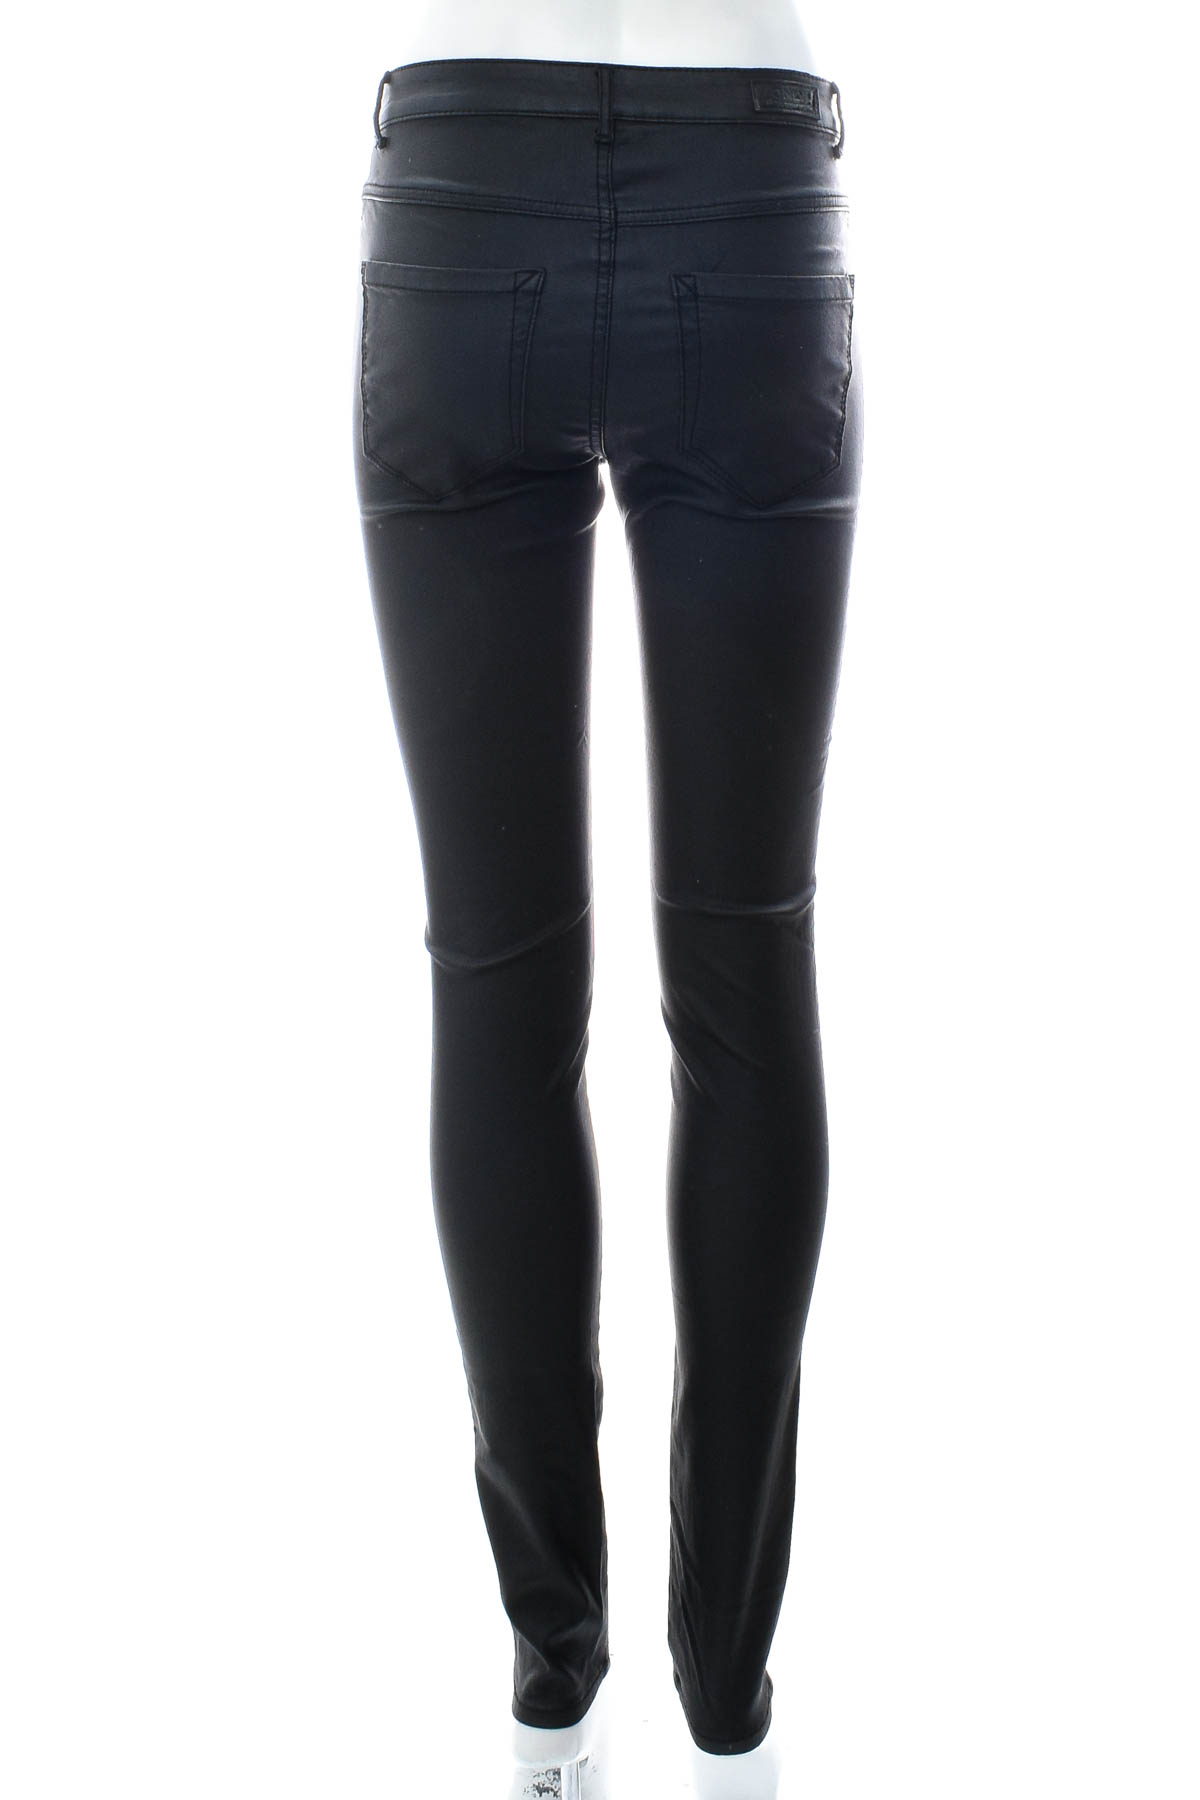 Women's leather trousers - ONLY - 1